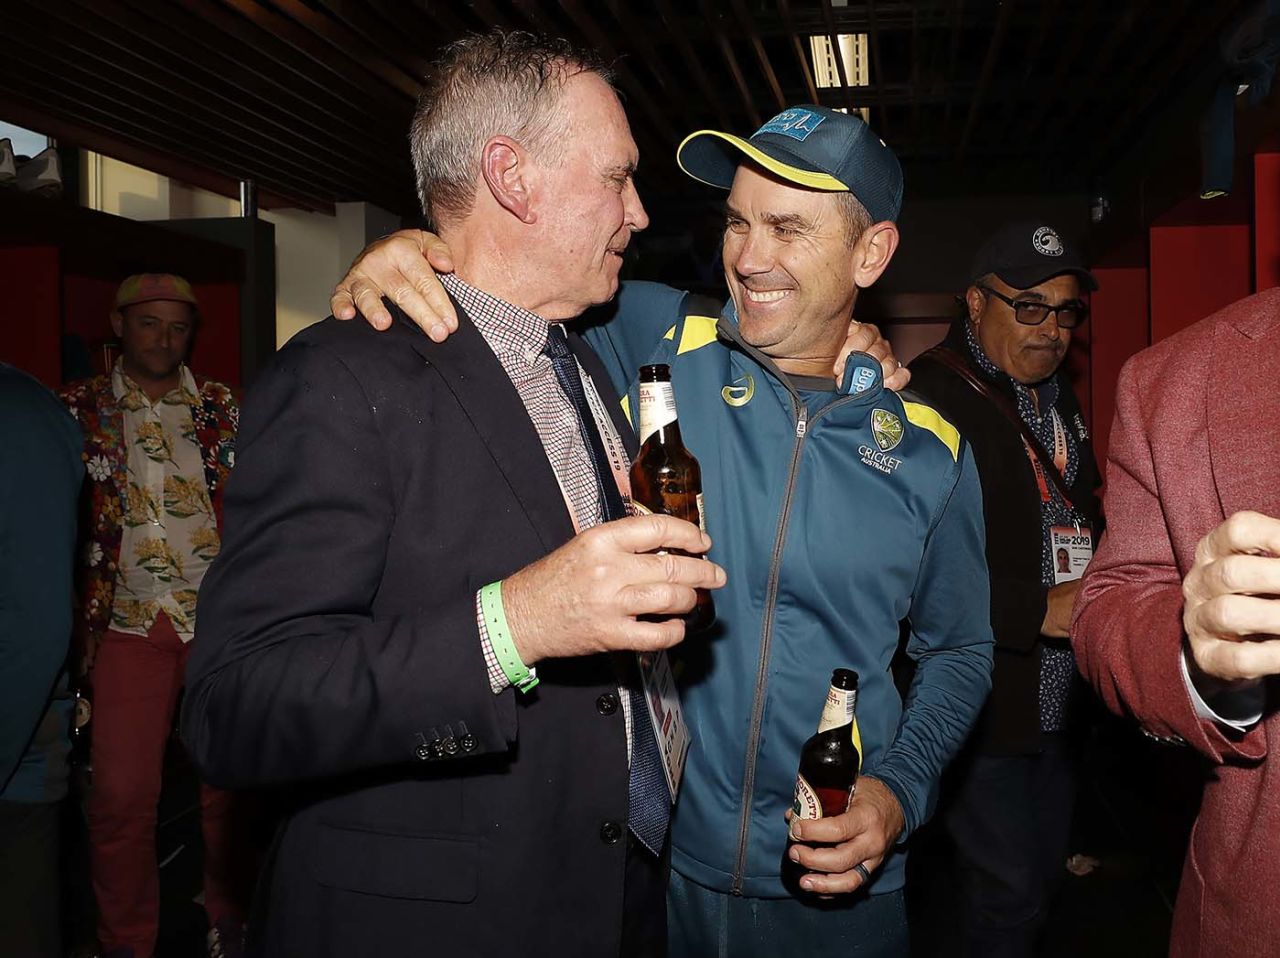 Justin Langer and Trevor Hohns, the Australia chairman of selectors, share a light moment, England v Australia, The Ashes, 4th Test, Old Trafford, September 8, 2019